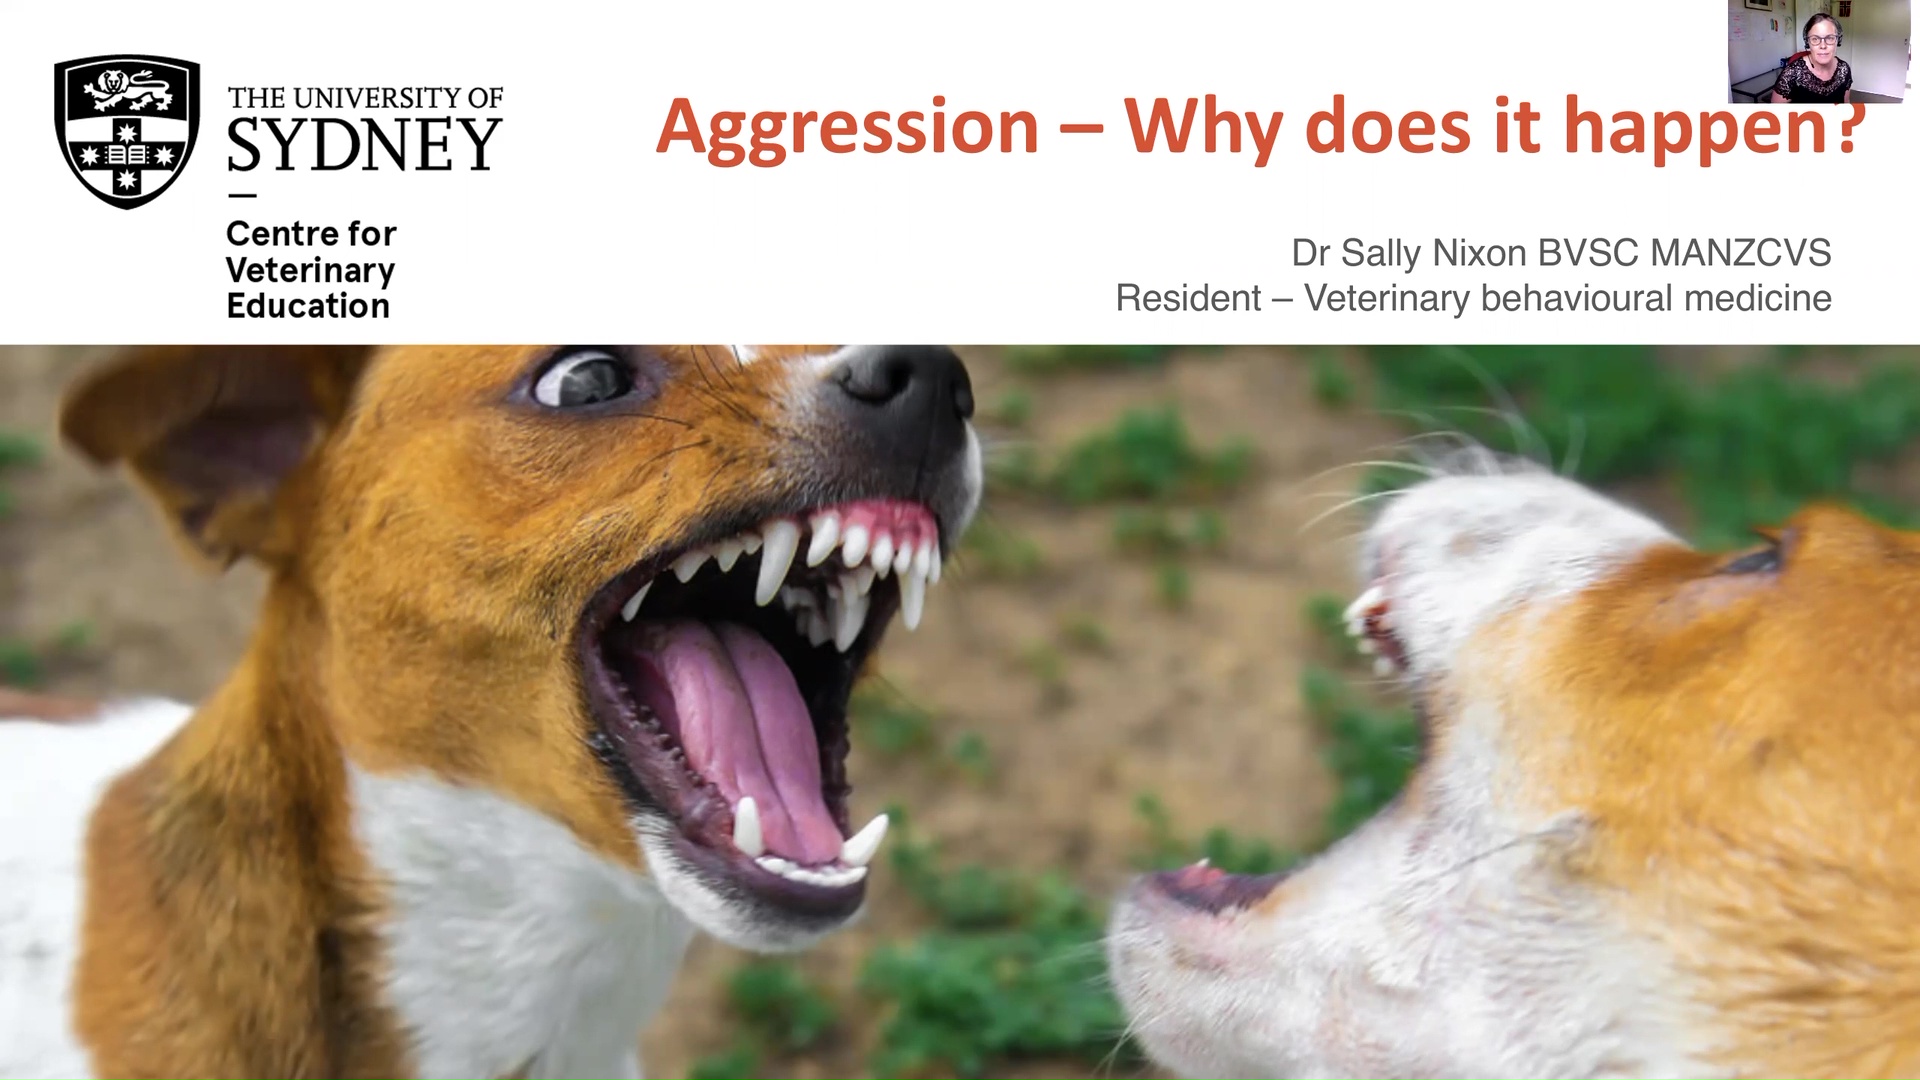 Aggression - Why does it happen?